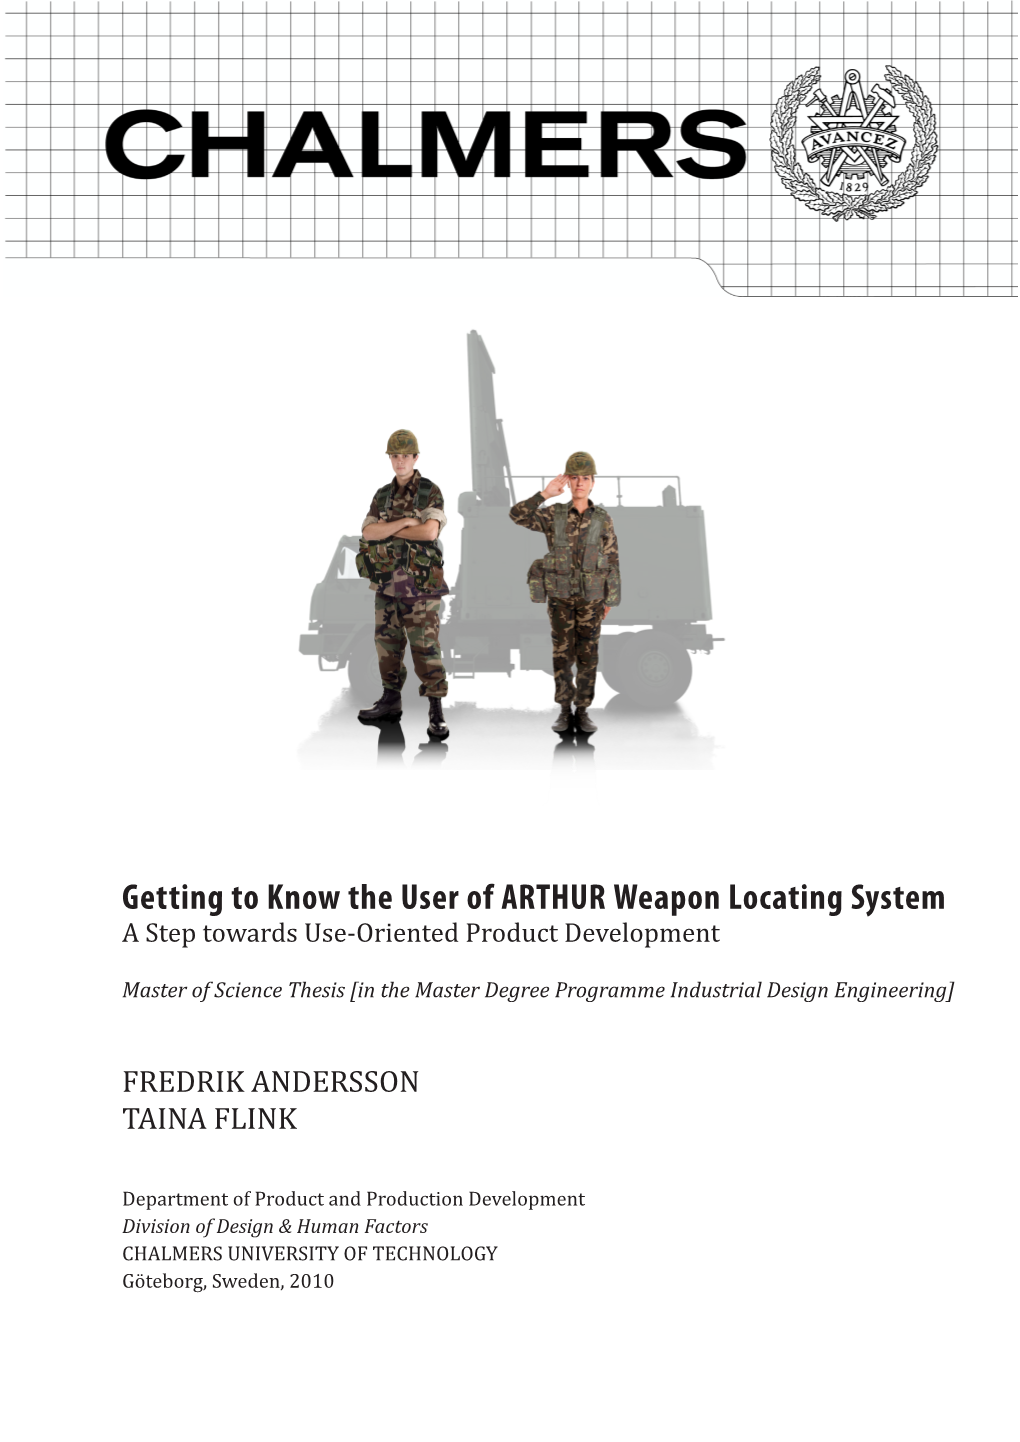 Getting to Know the User of ARTHUR Weapon Locating System a Step Towards Use-Oriented Product Development